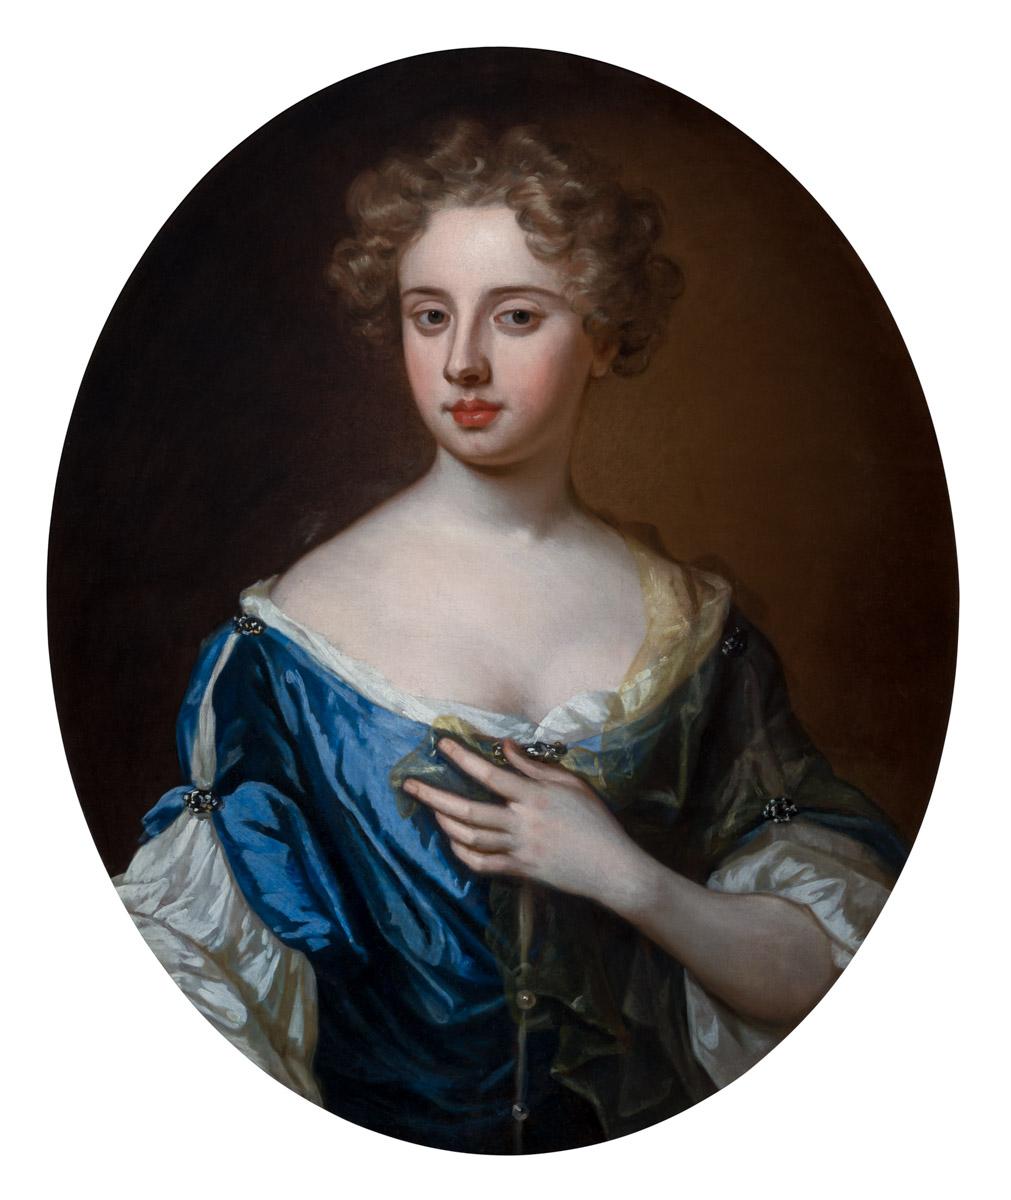 Portrait of a Lady in a Blue Gown Holding a Sheer Scarf Painting Godfrey Kneller For Sale 1